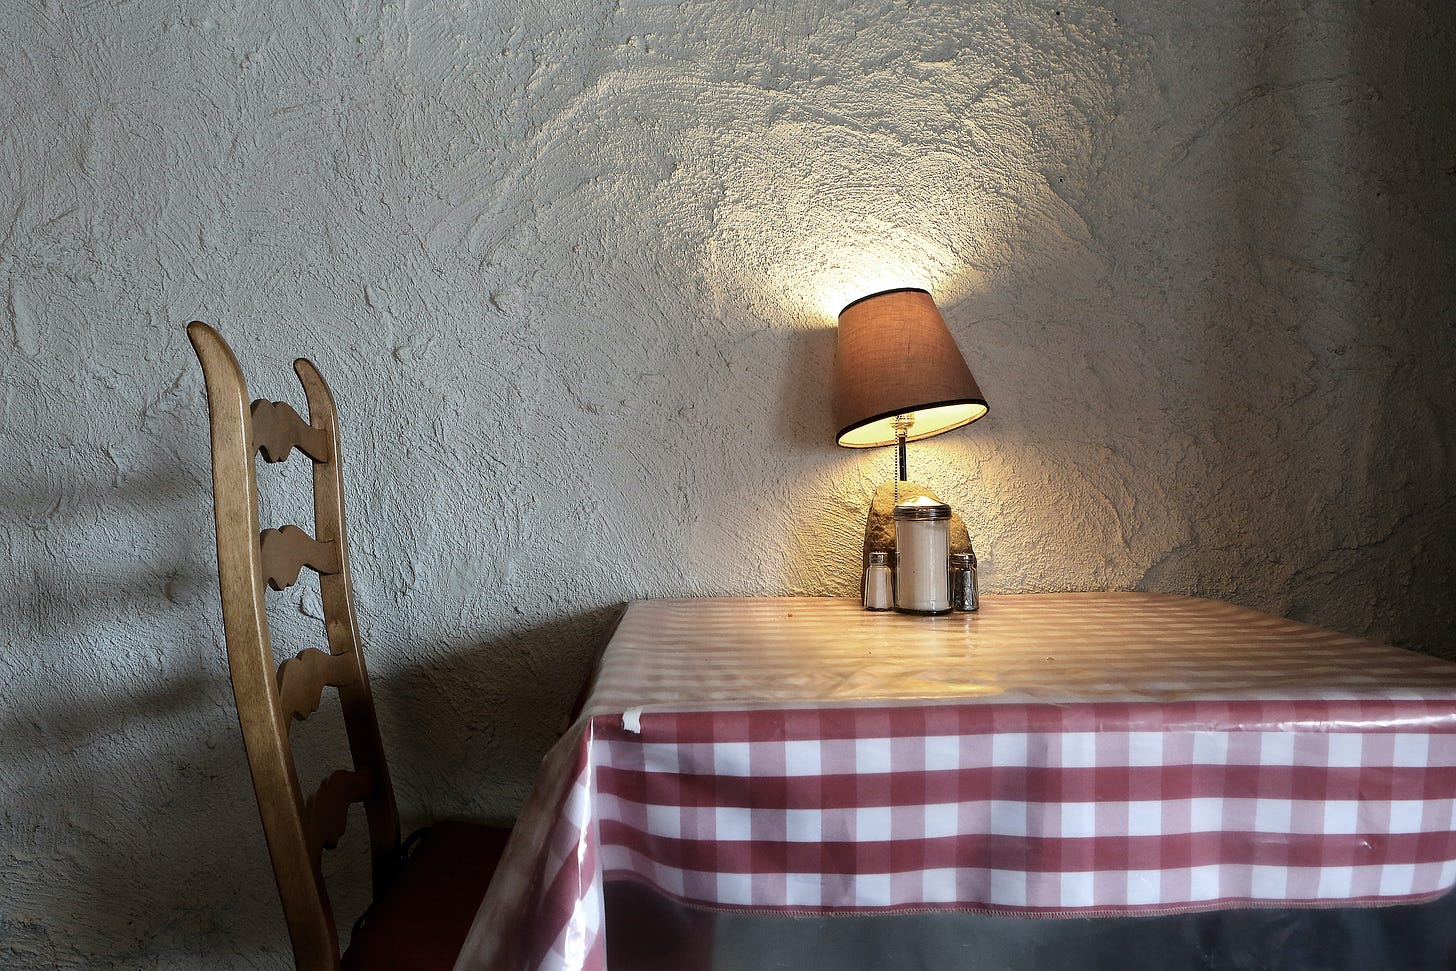 A classic Italian red-and-white checkered tablecloth at a corner table in a little restaurant. A small lamplight is on the inside of the table.